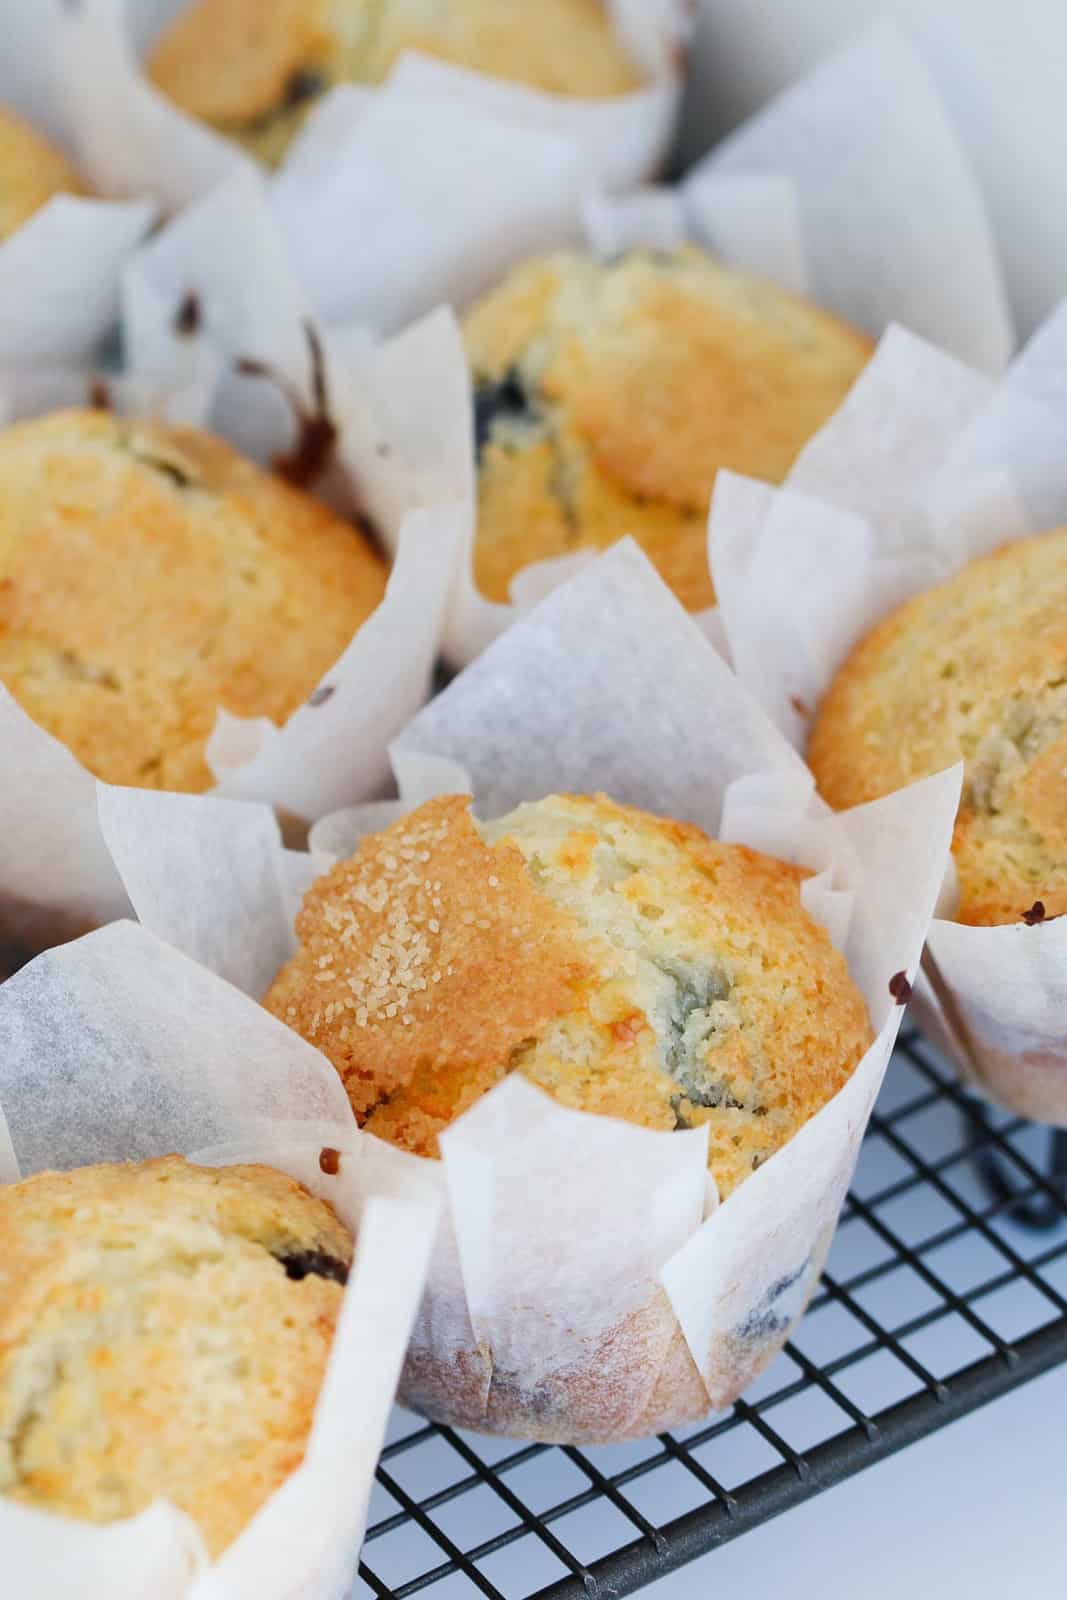 Muffins in white paper liners on a wire cooling rack.